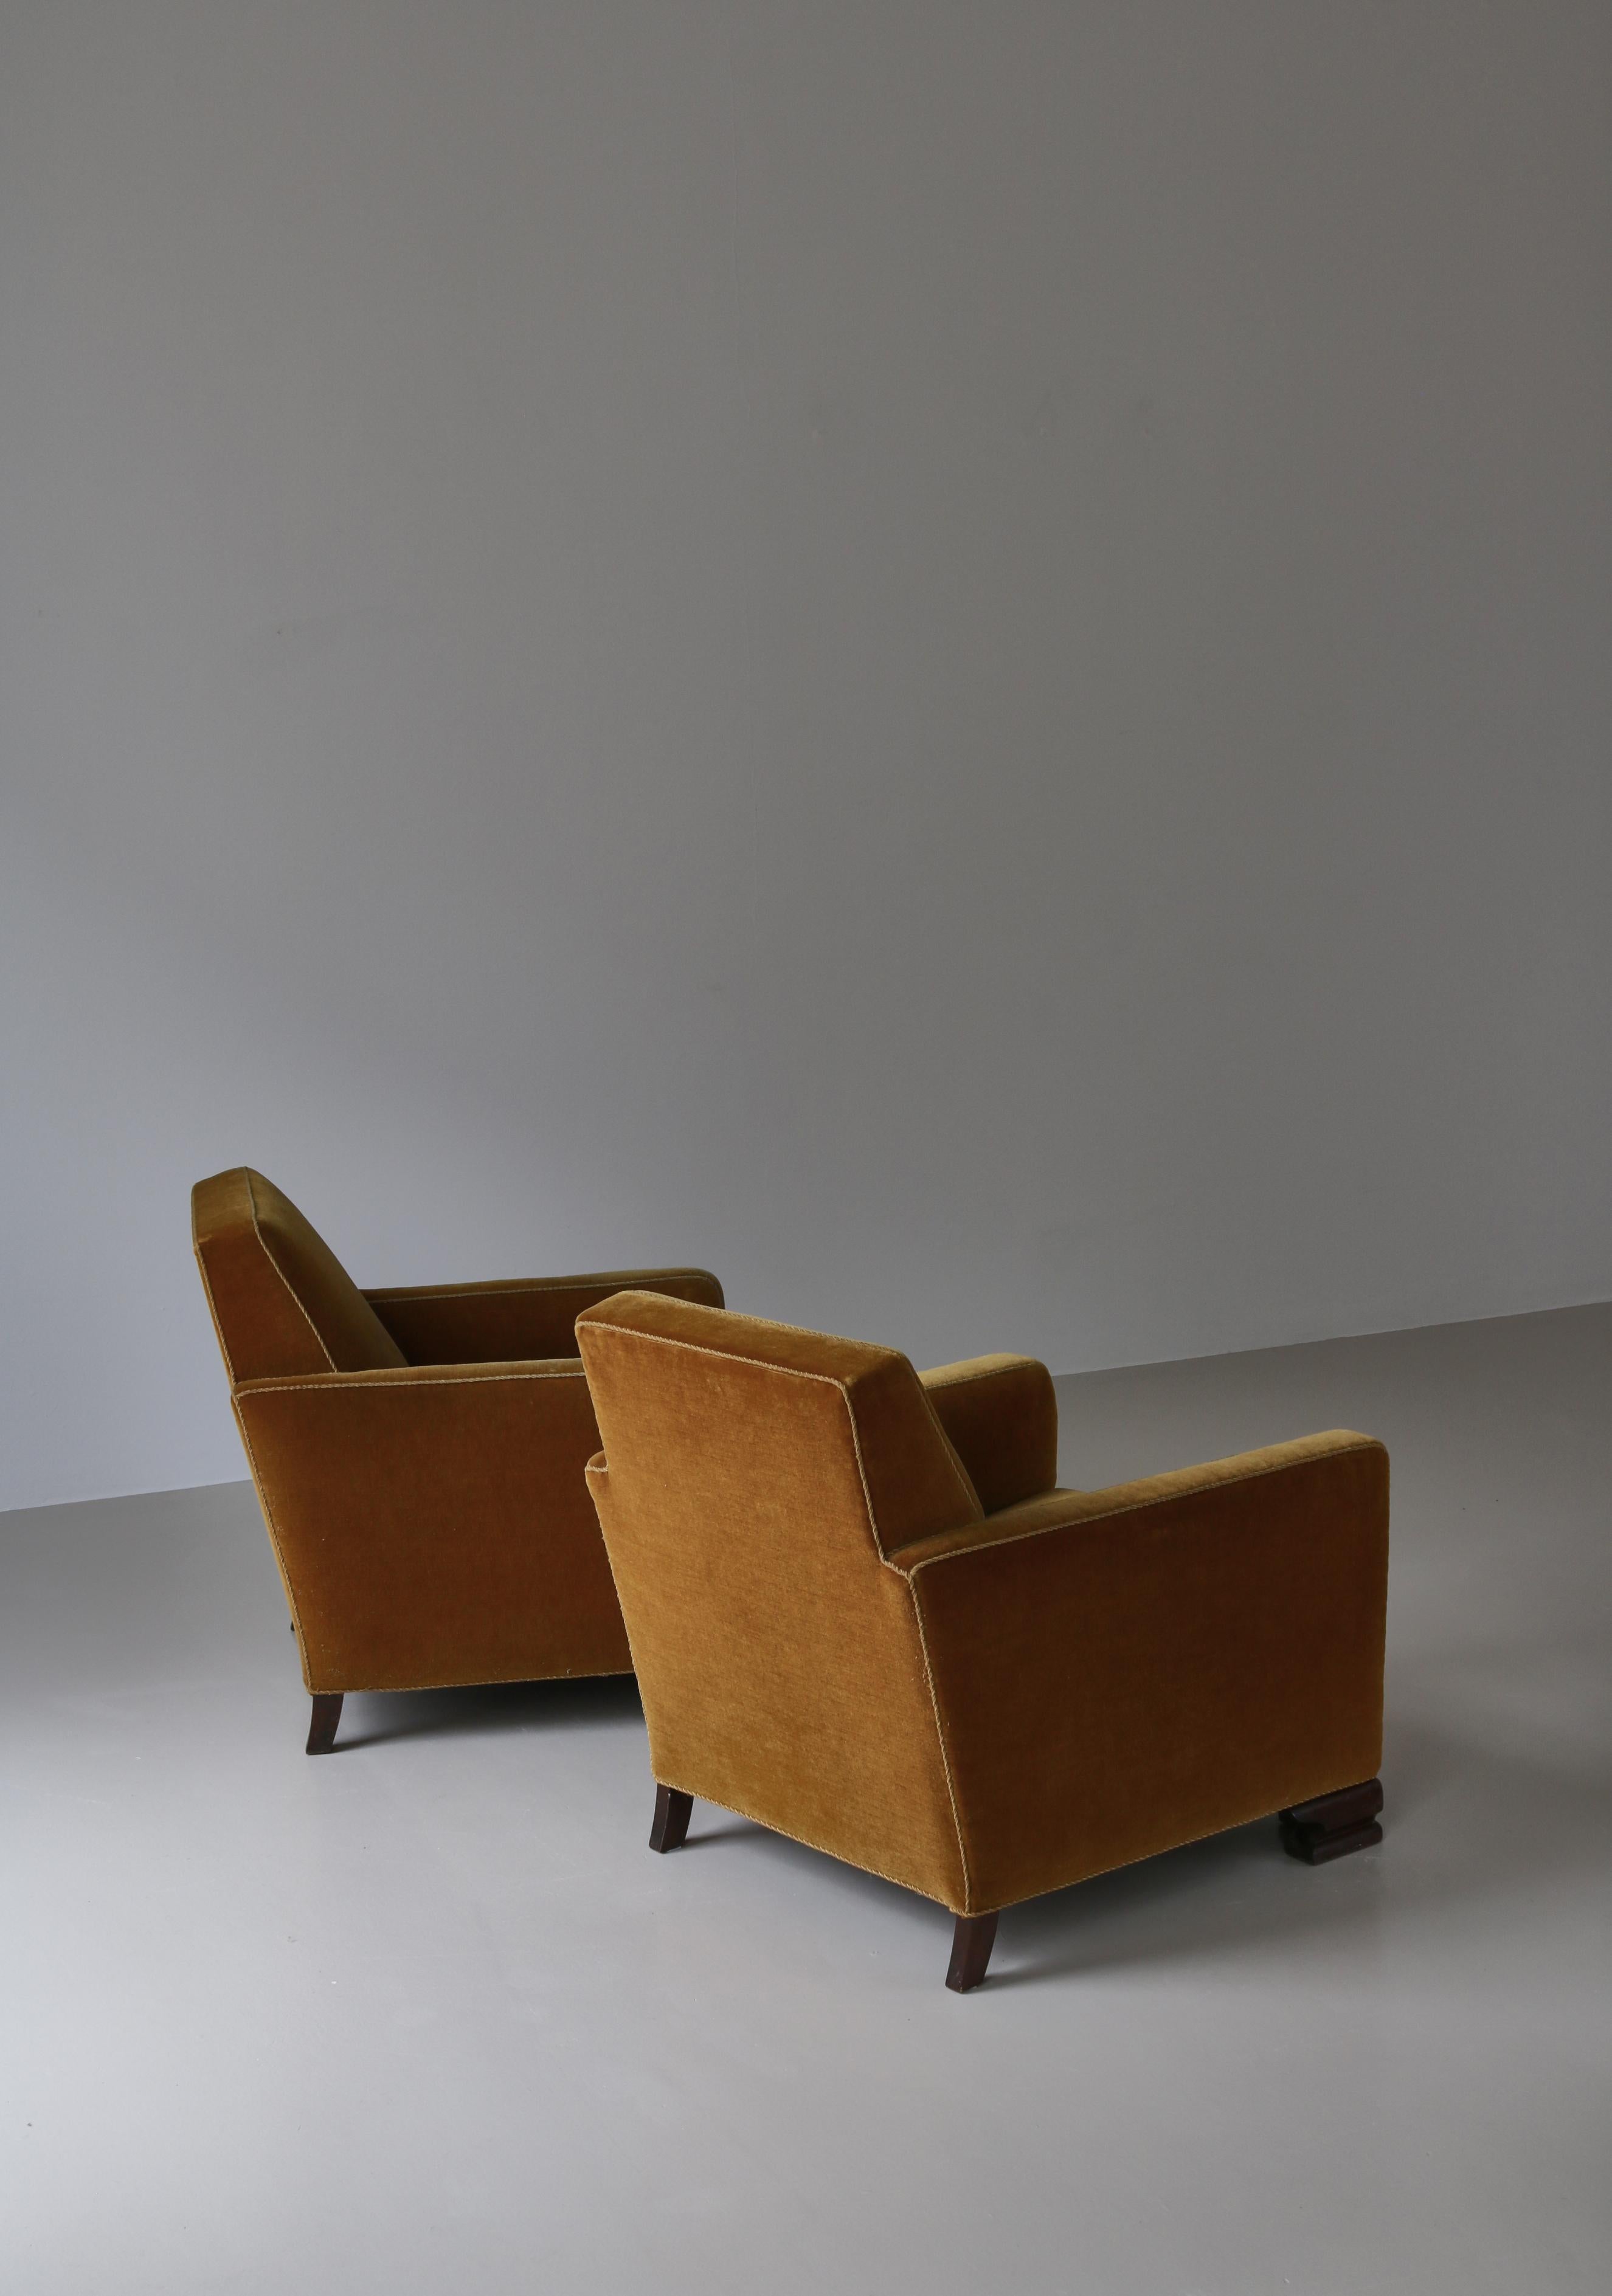 Pair of Danish Cabinetmaker Art Deco Lounge Chairs in Yellow Mohair, 1930s For Sale 1